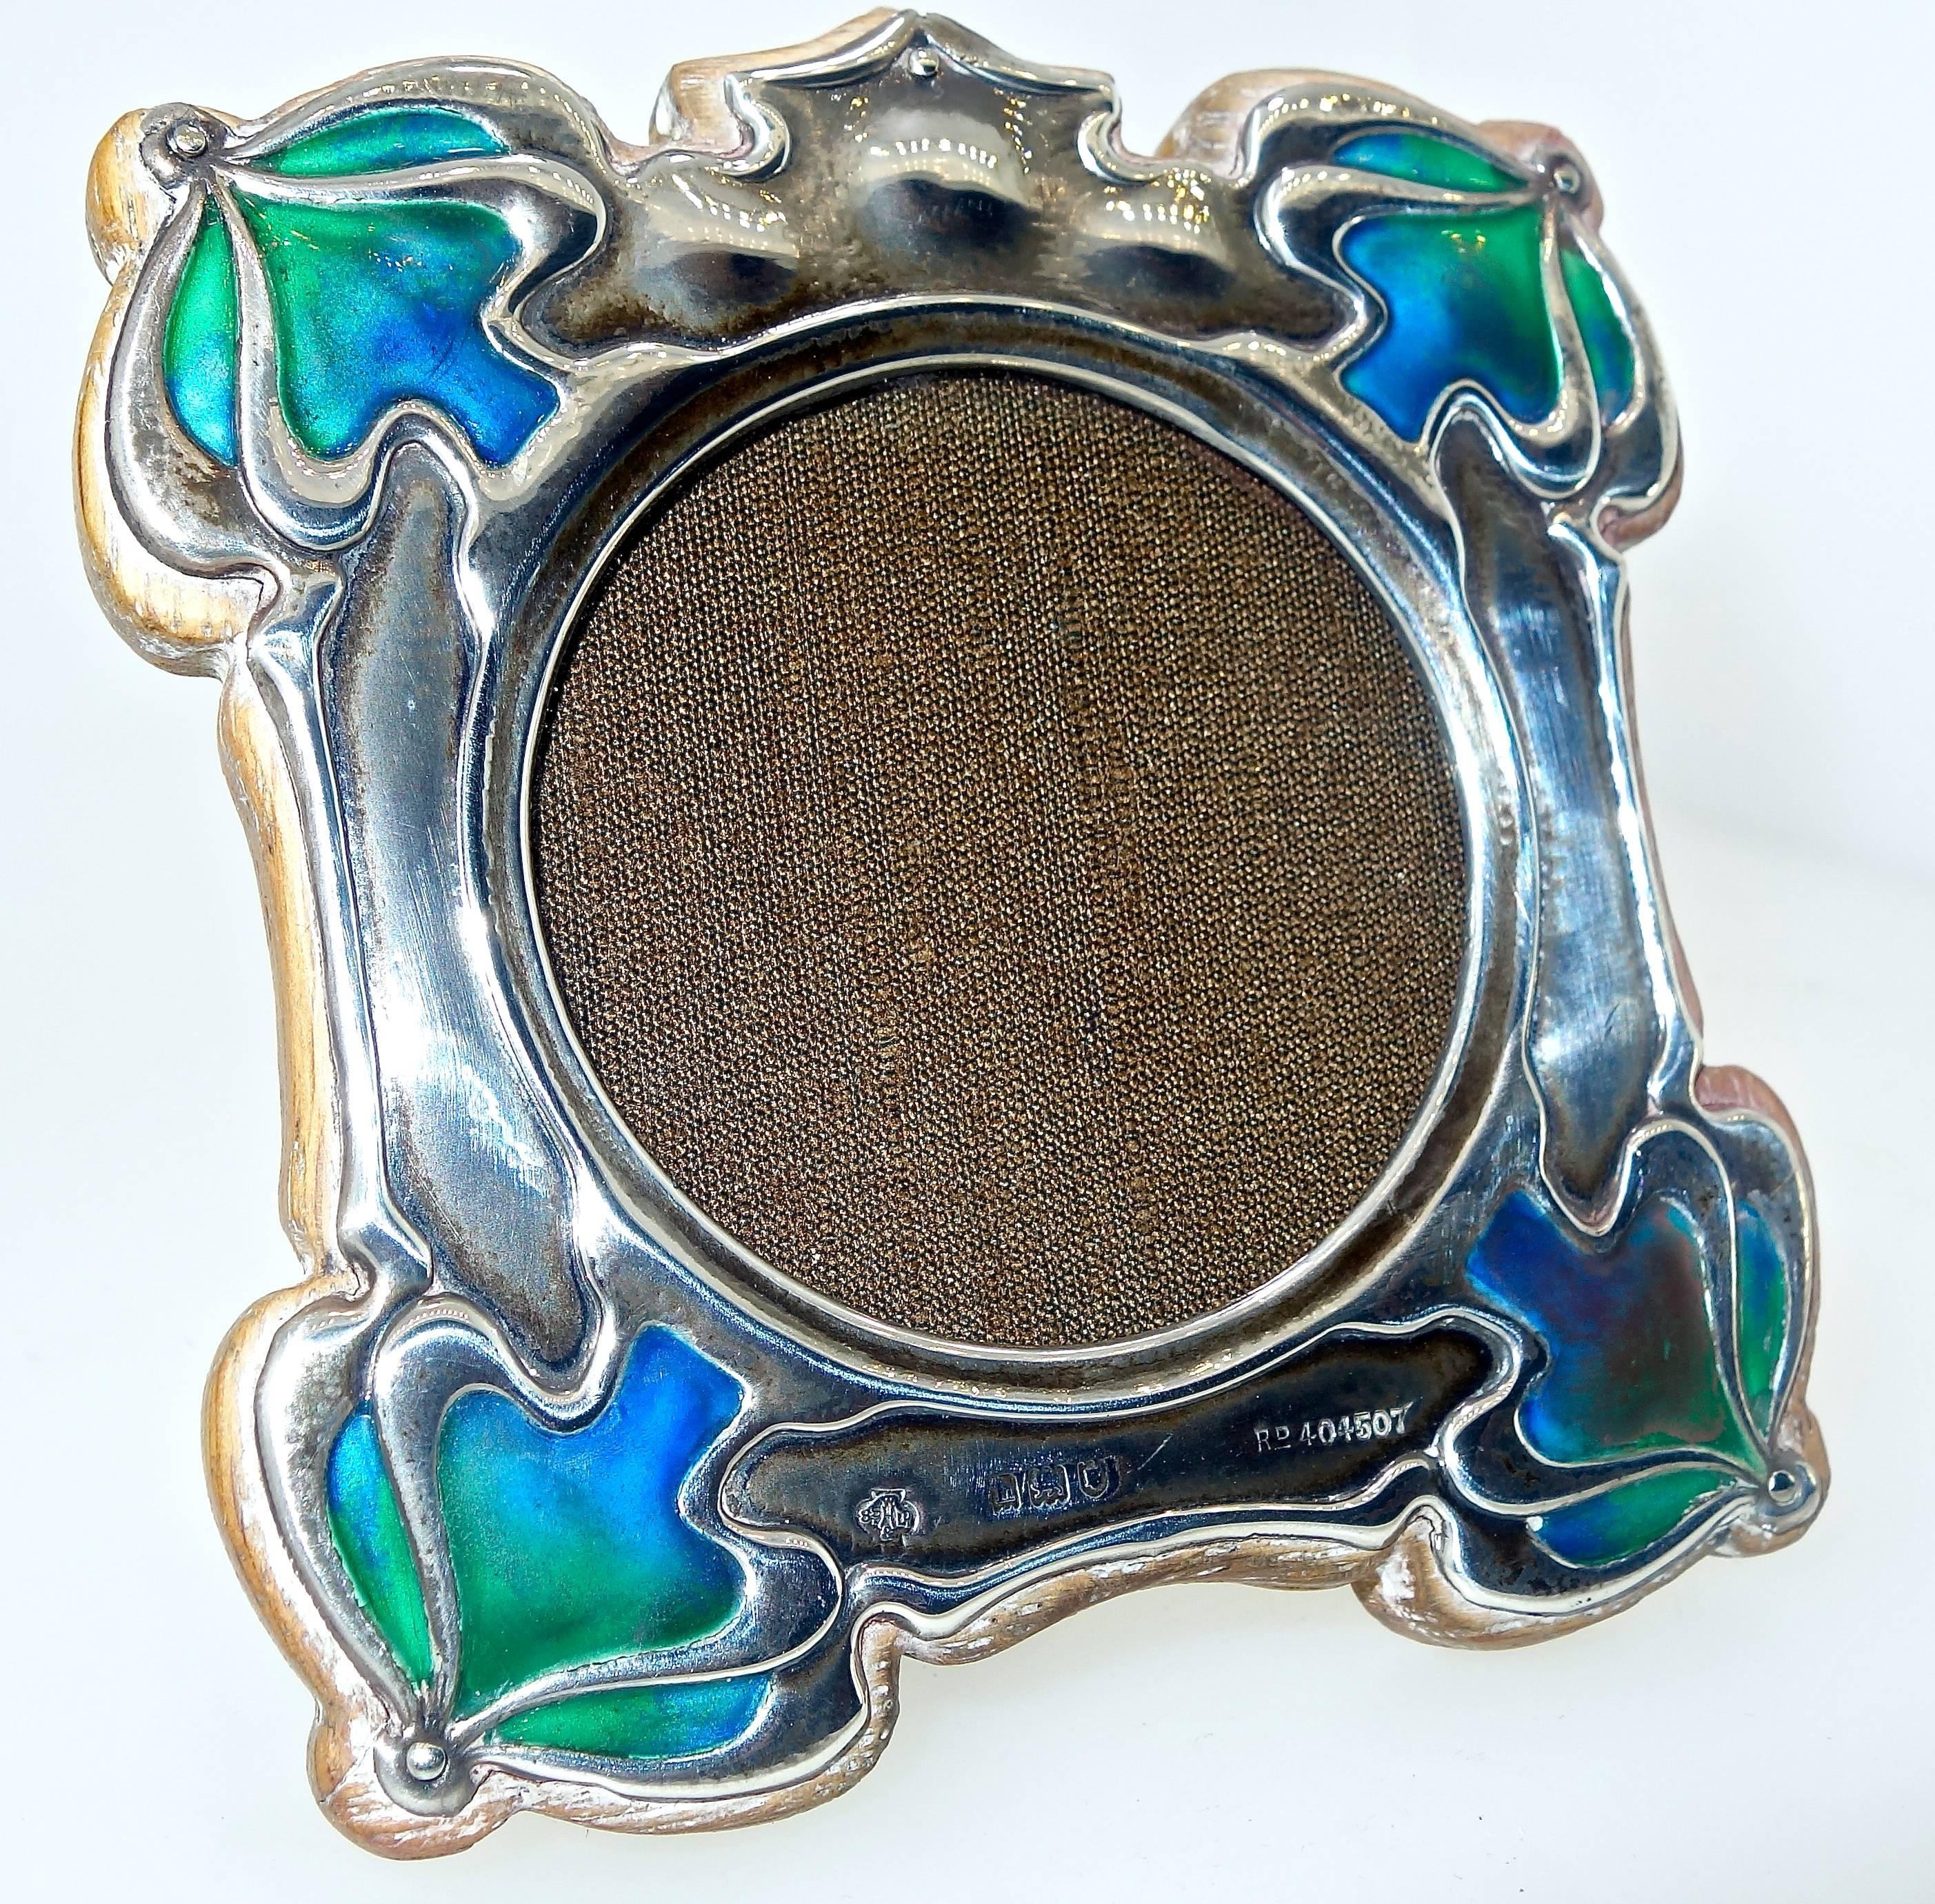 Shaded peacock color enamel accent the corners of this antique sterling silver frame.  This period piece bears the English marks of a small h, a lion and a shield.  The piece bears the maker's mark and is numbered.  The  back and easels are the